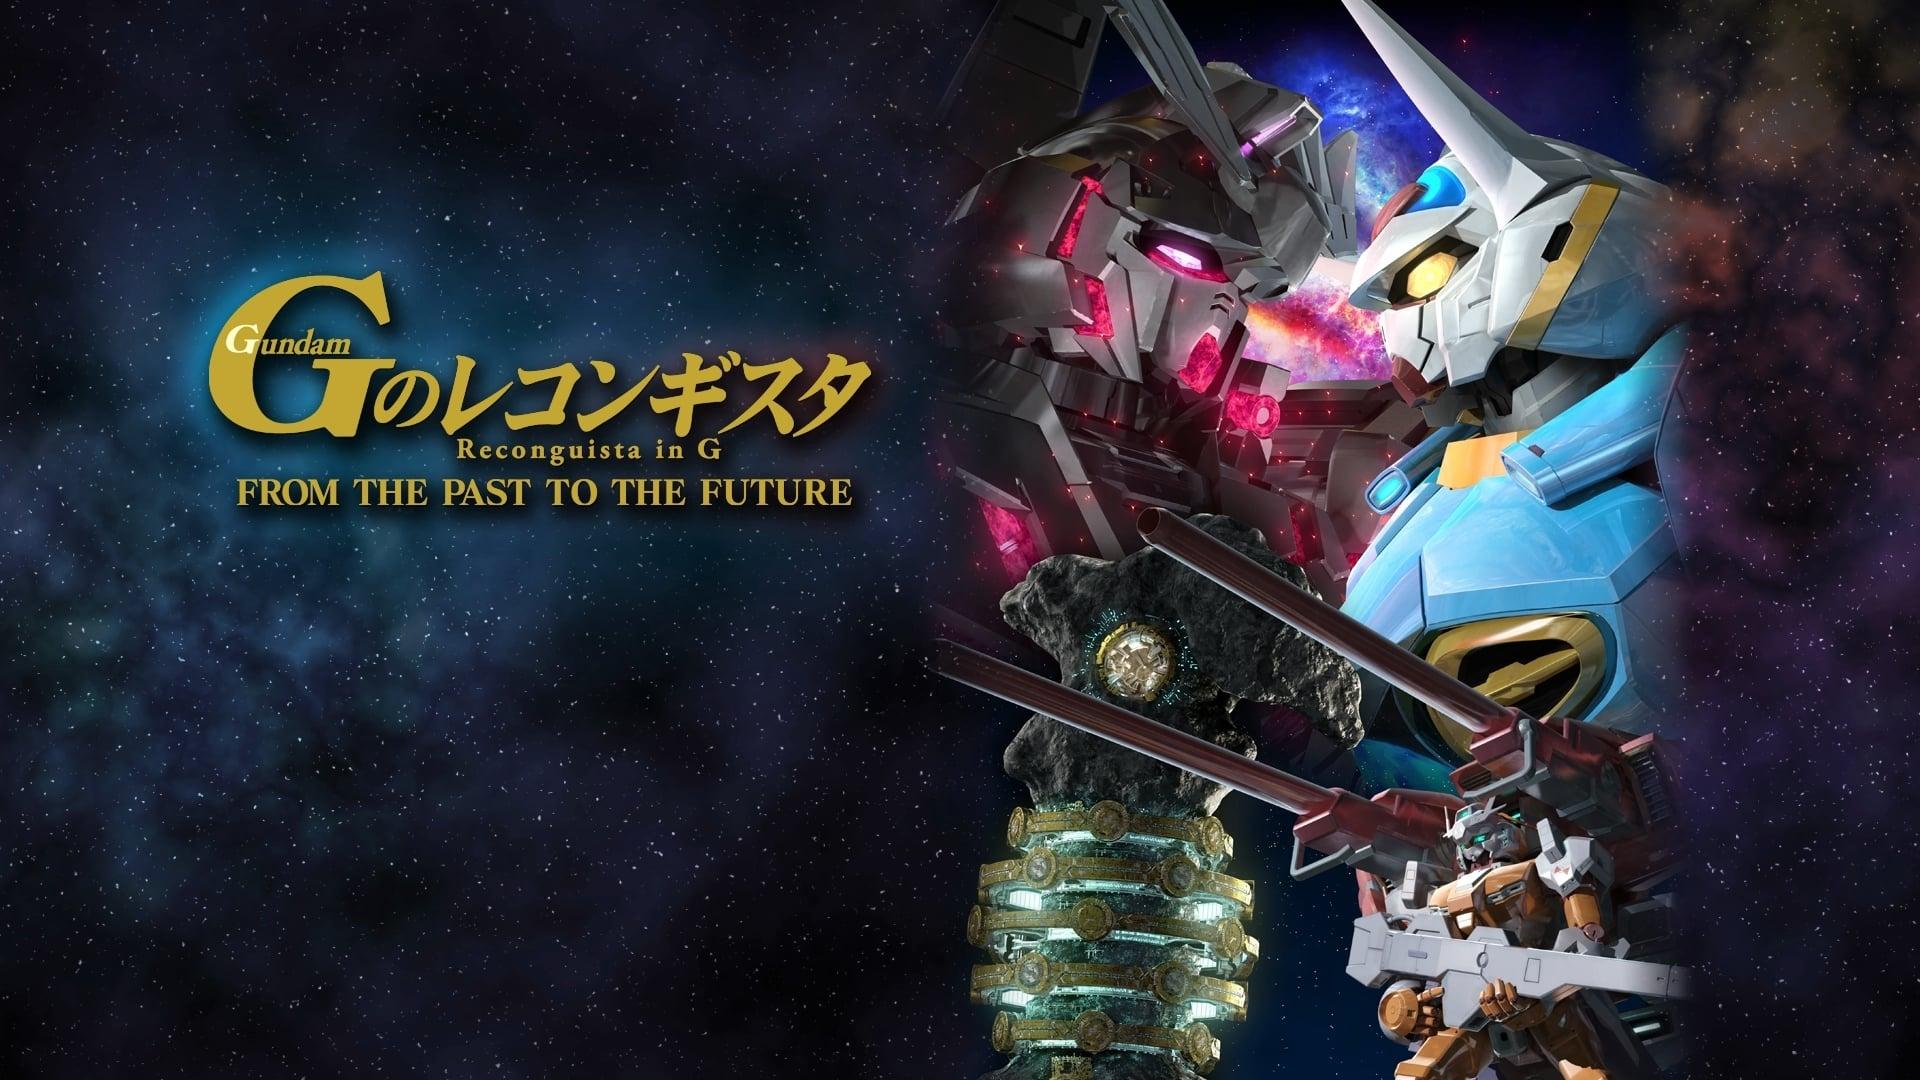 Gundam Reconguista in G: FROM THE PAST TO THE FUTURE backdrop